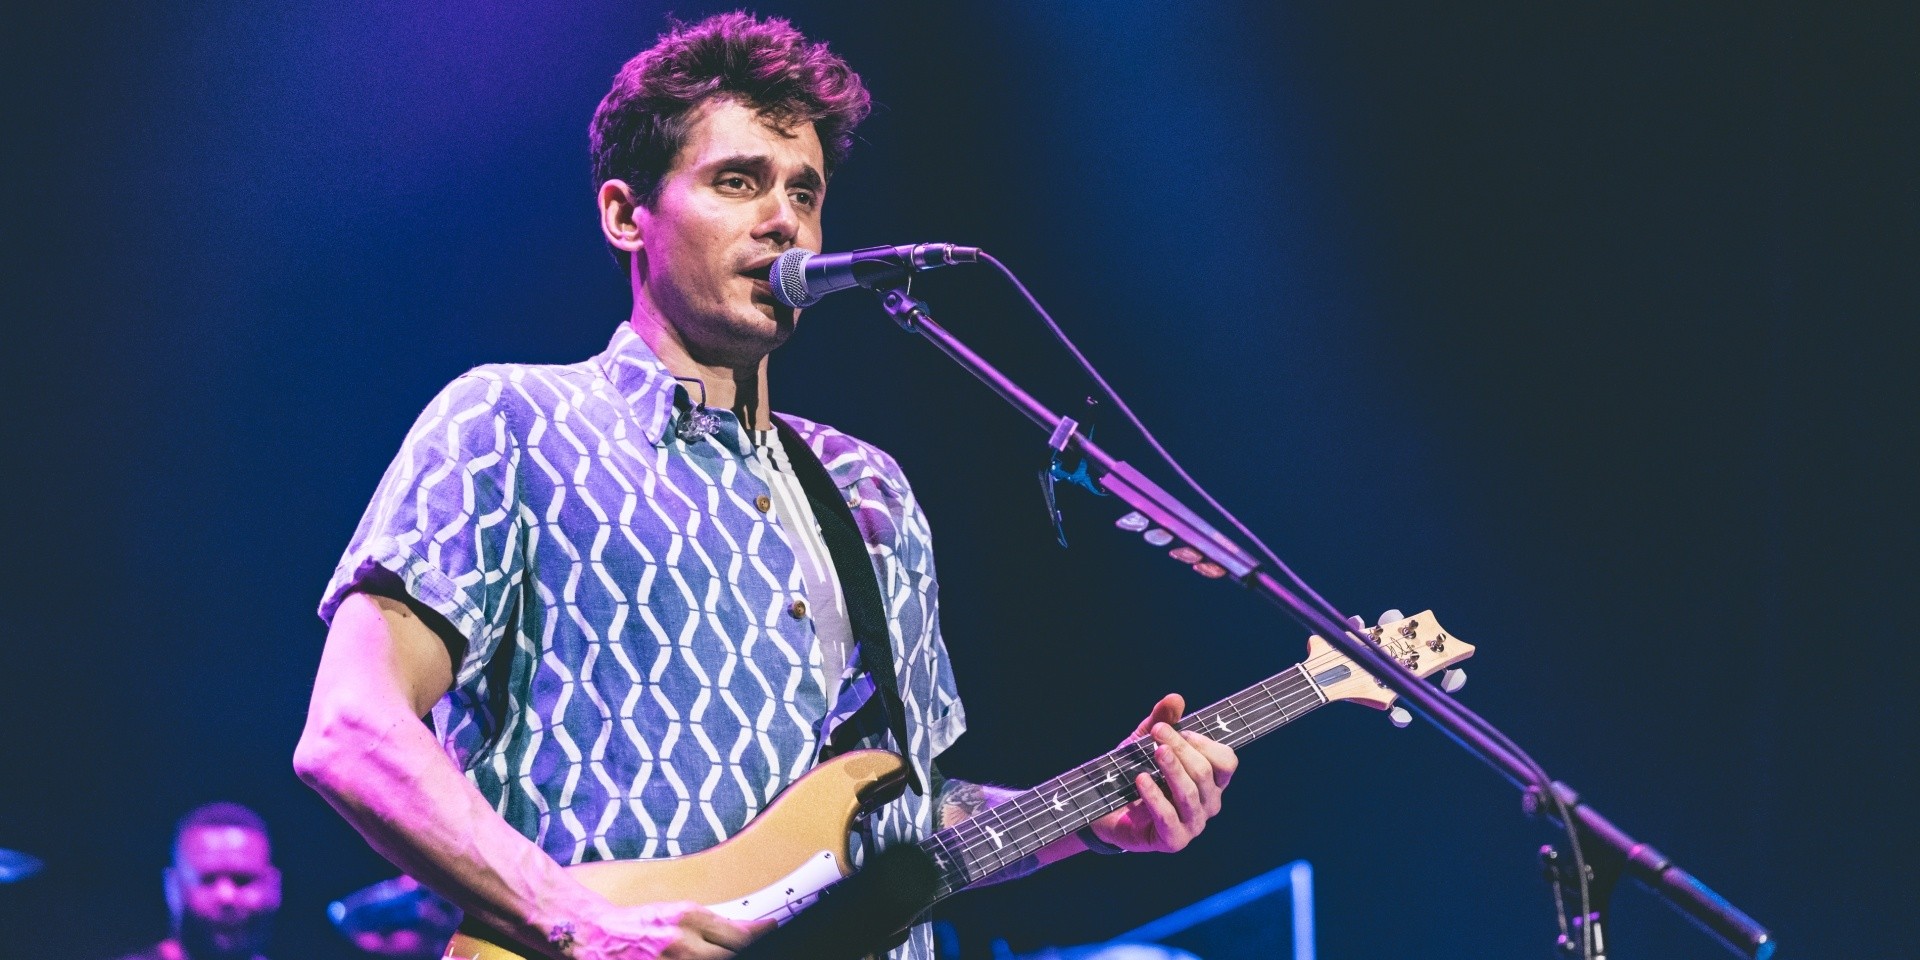 John Mayer’s debut performance in Singapore pulls audience into his gravity – gig report 